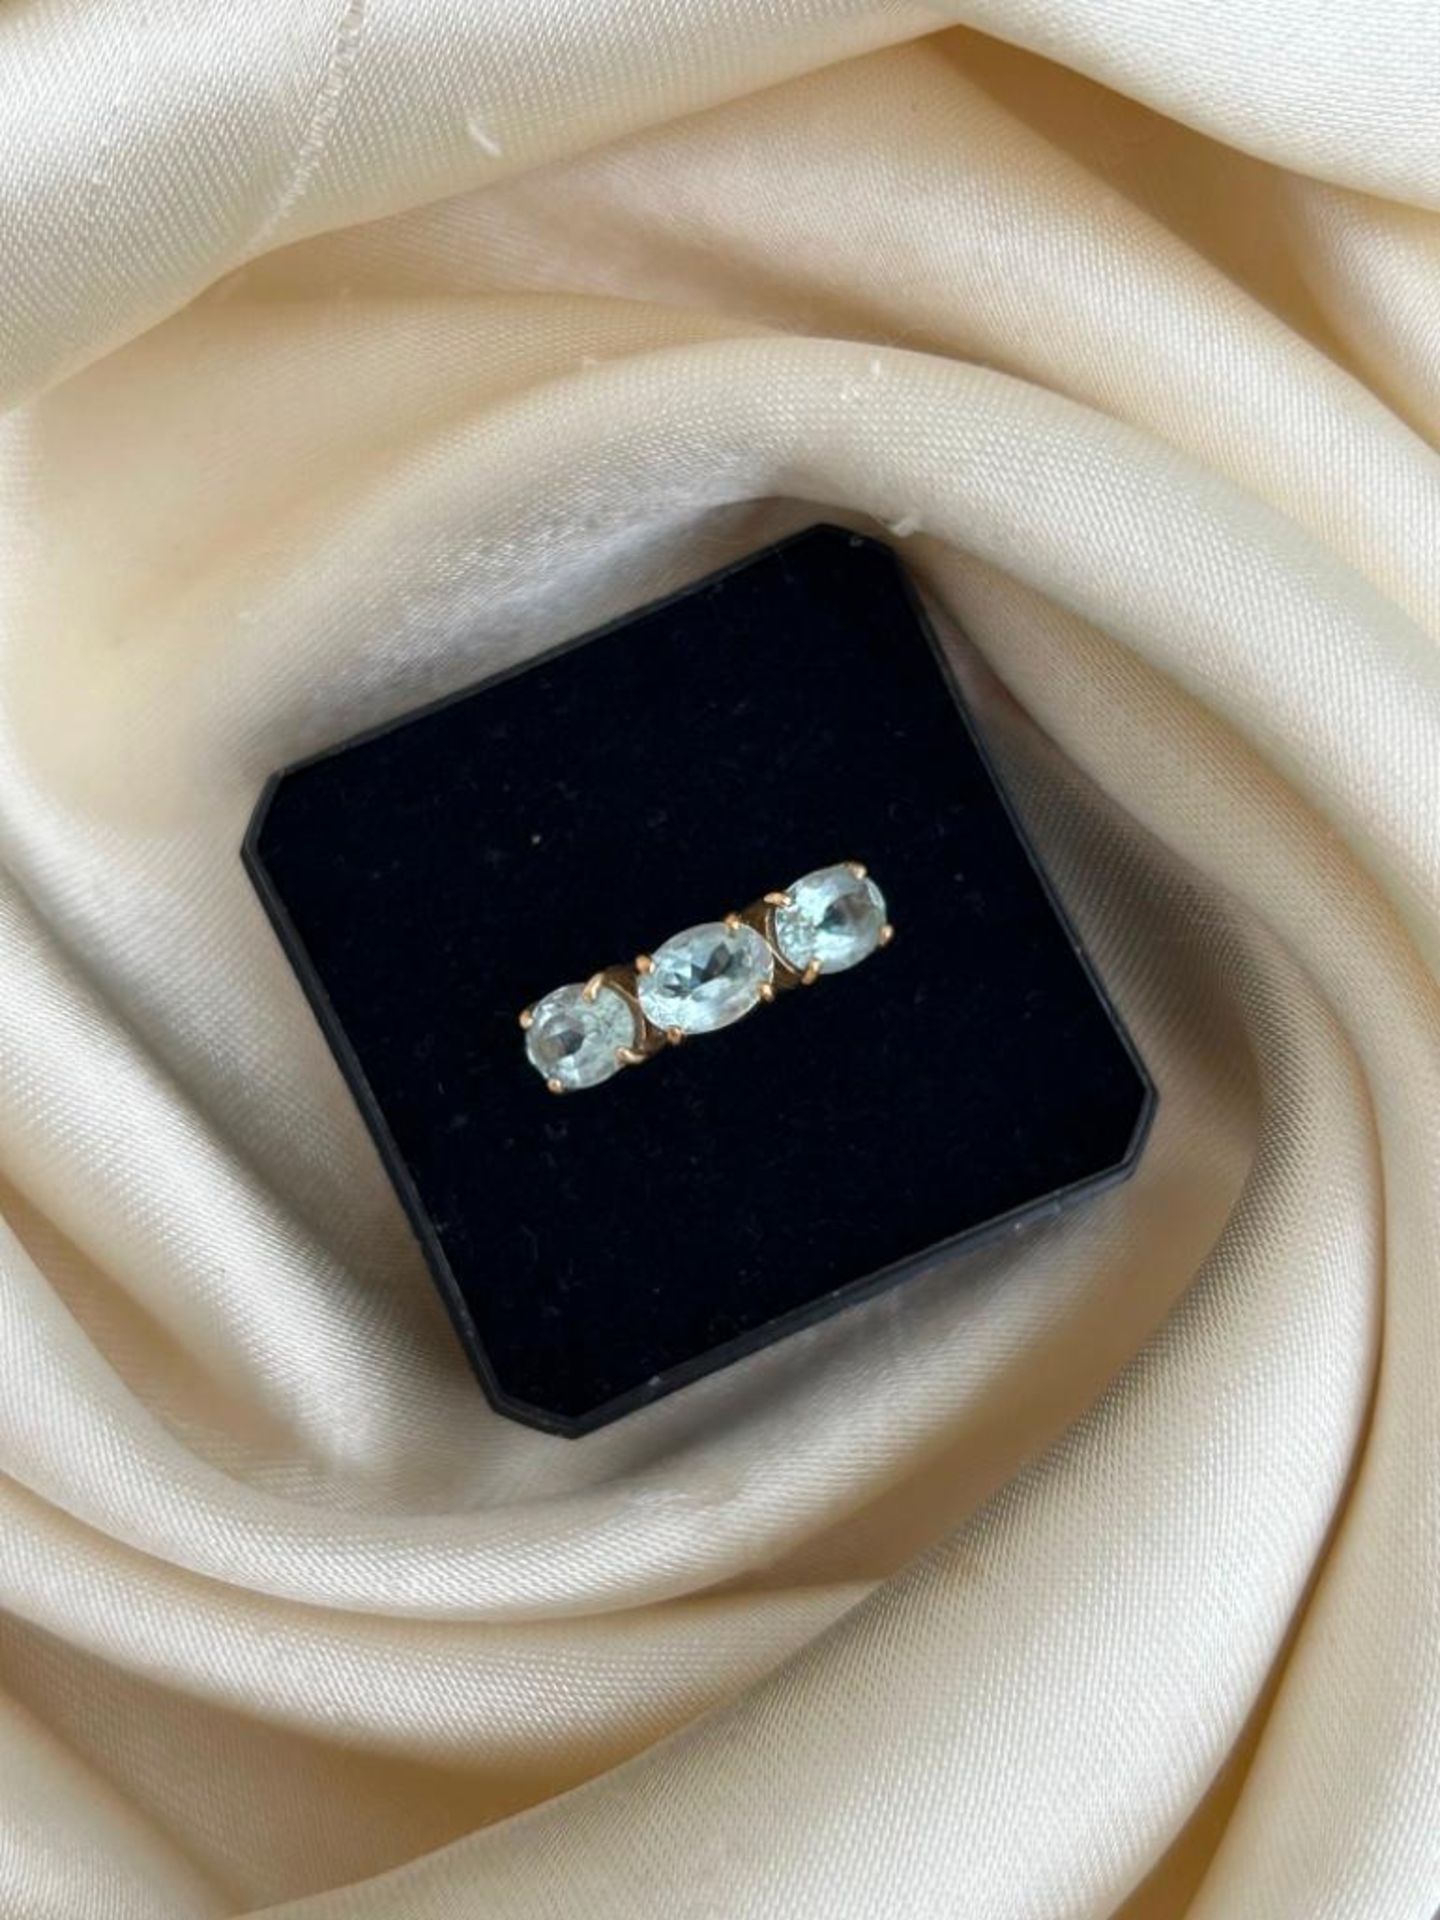 Sweet Aquamarine 3 Stone Ring with Diamond Shoulders in Gold - Image 4 of 7